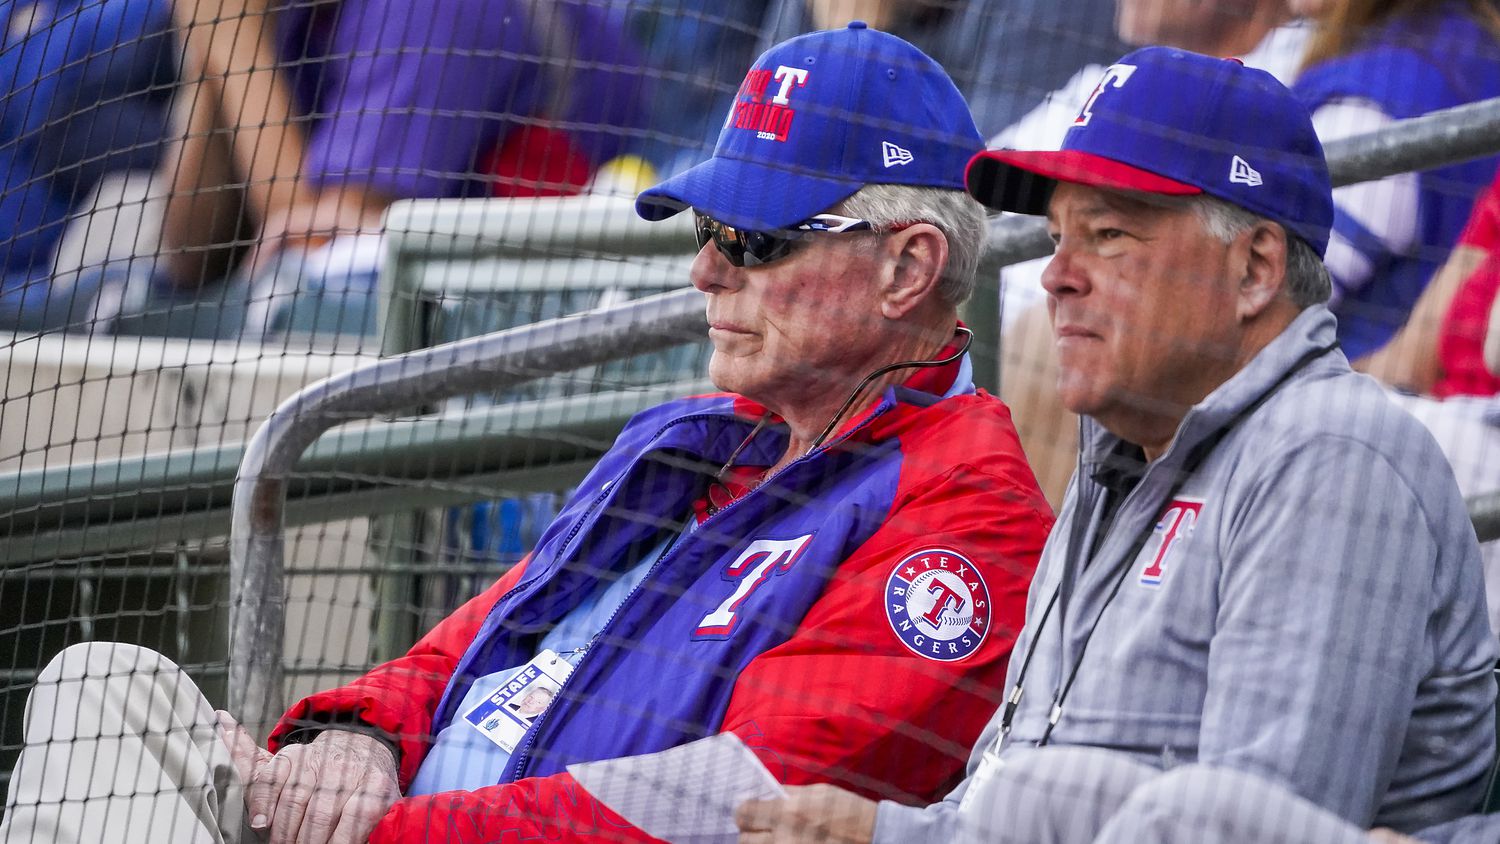 Texas Rangers co-chairman and managing partner Ray C. Davis (left) and chairman, ownership committee and chief operating officer Neil Leibman watch during the third inning of a spring training game against the Chicago Cubs at Surprise Stadium on Thursday, Feb. 27, 2020, in Surprise, Ariz.